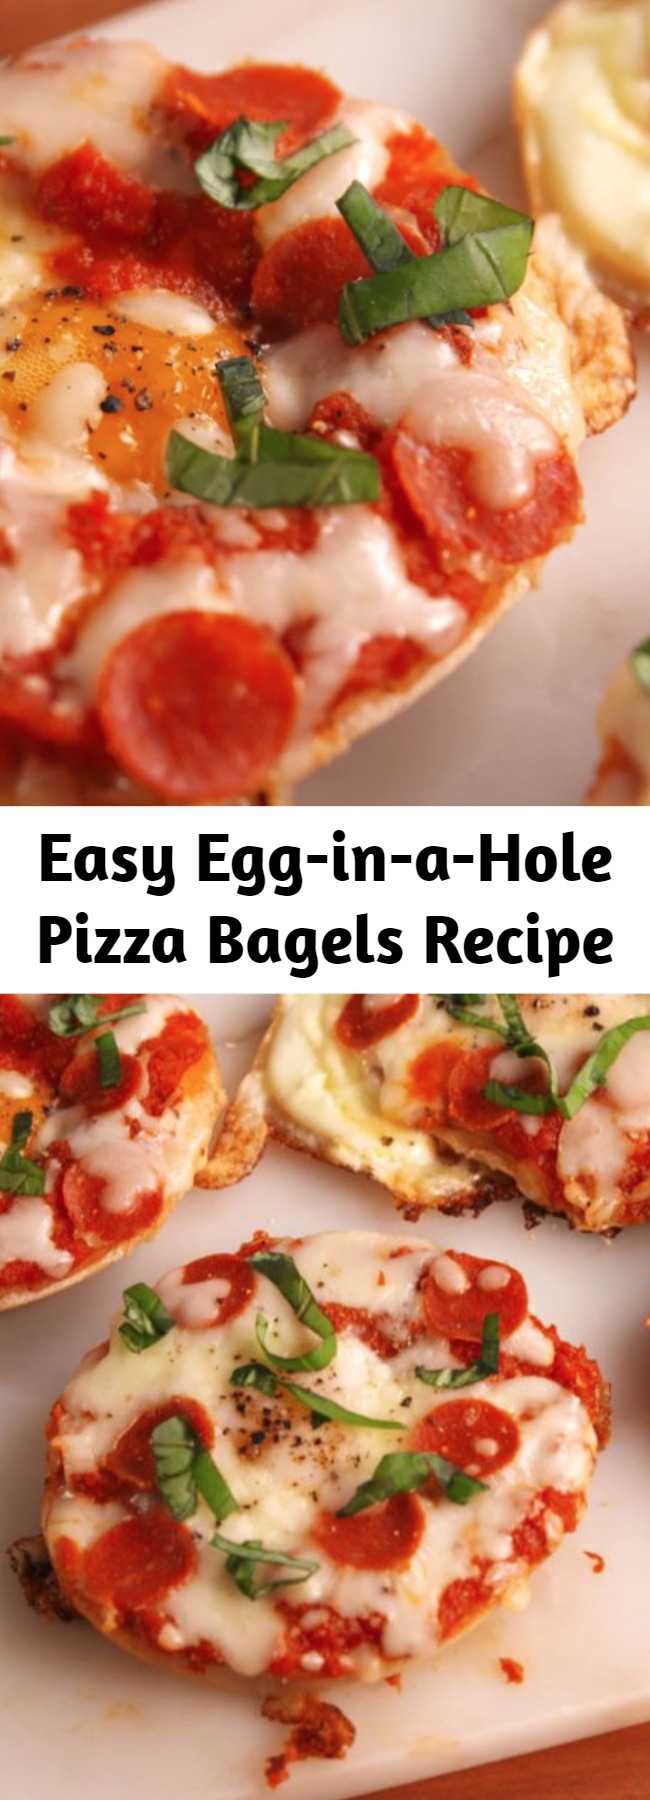 Easy Egg-in-a-Hole Pizza Bagels Recipe - We didn't think it was possible, but pizza bagels actually just got better.